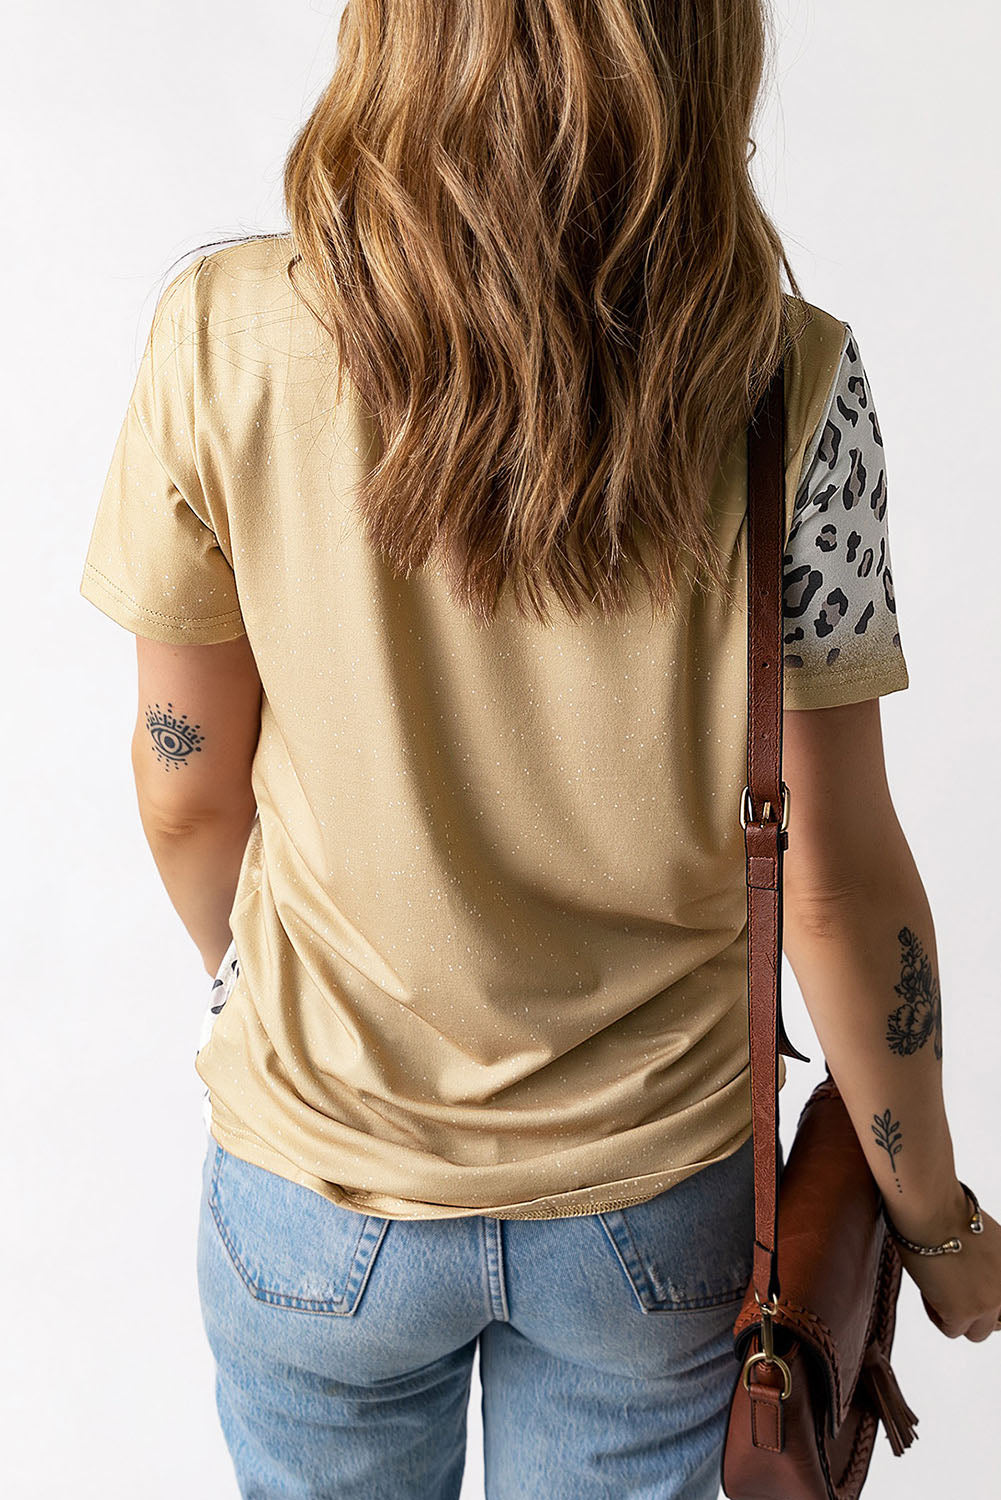 Easter Leopard Graphic Tee Shirt